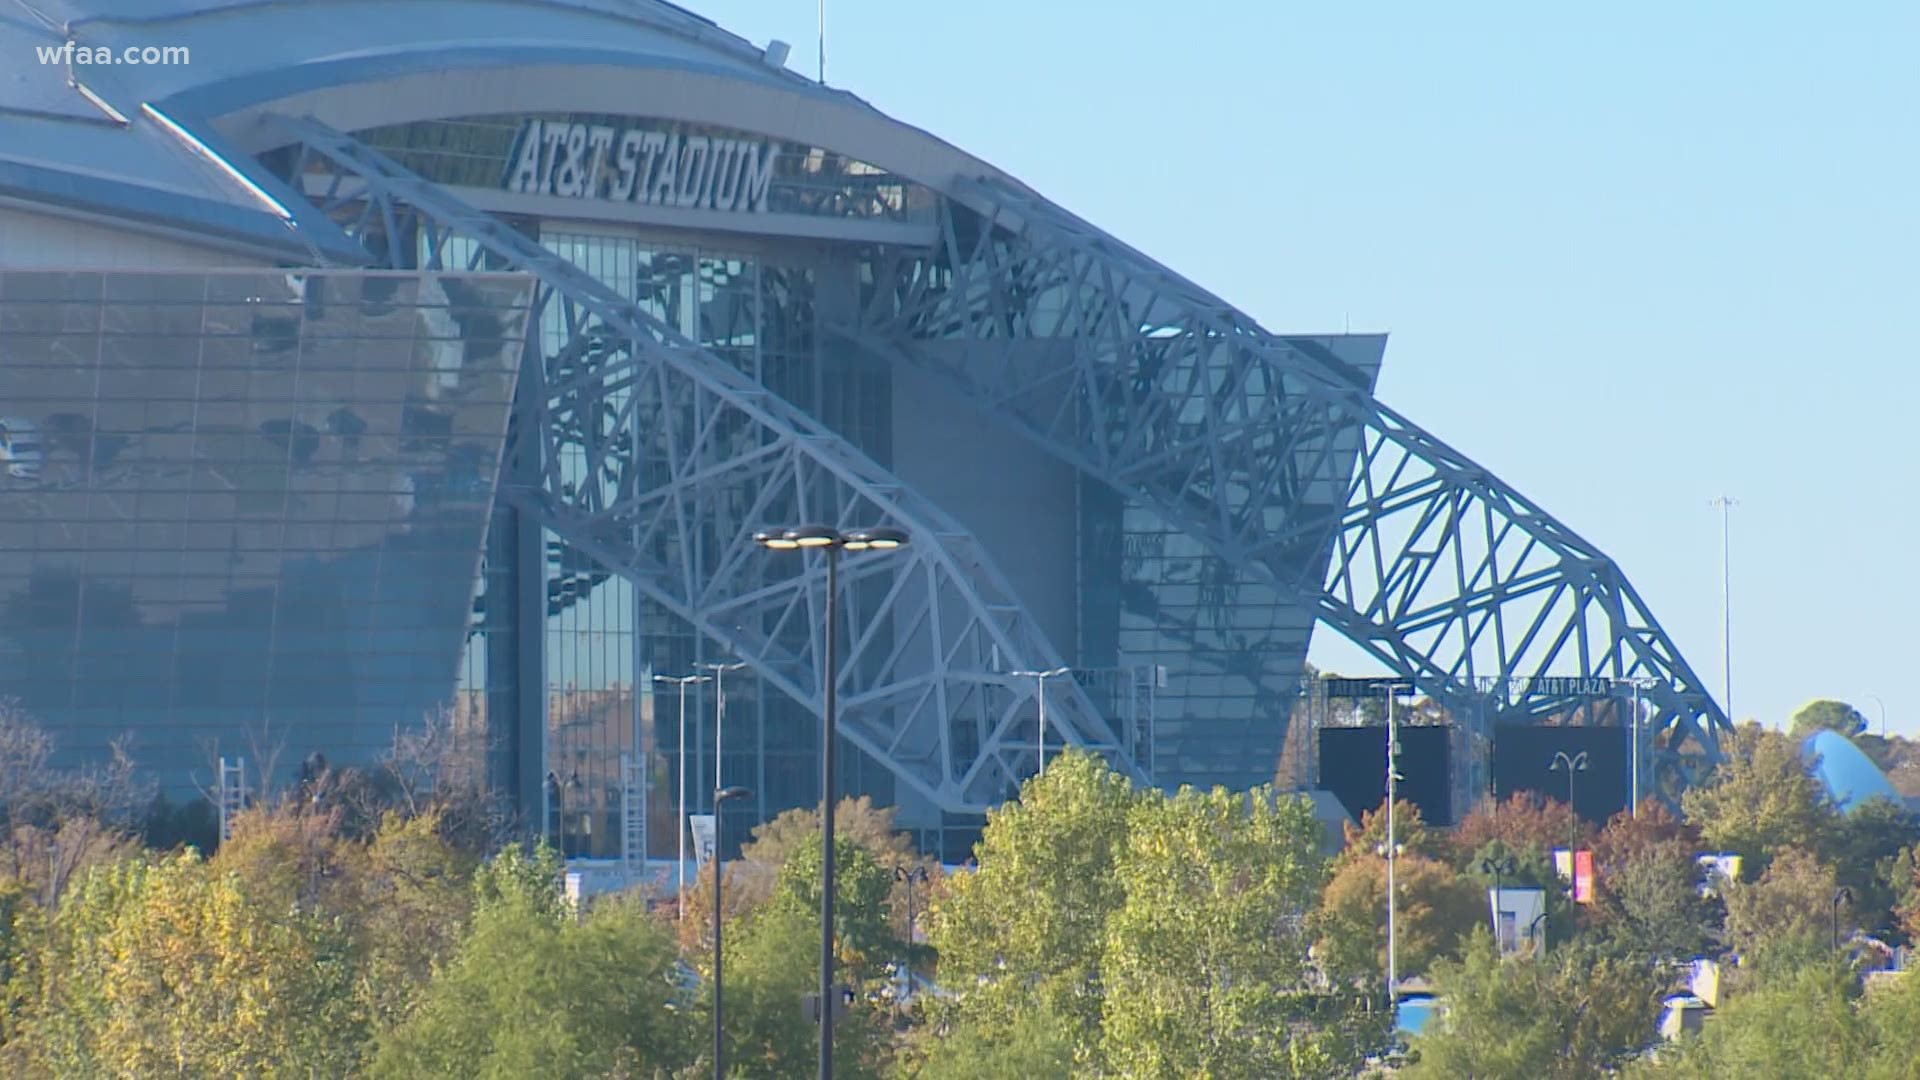 A Tarrant County spokesperson said 8 people who tested positive for COVID-19 said they had been at AT&T Stadium. More than 128,000 people have attended games there.